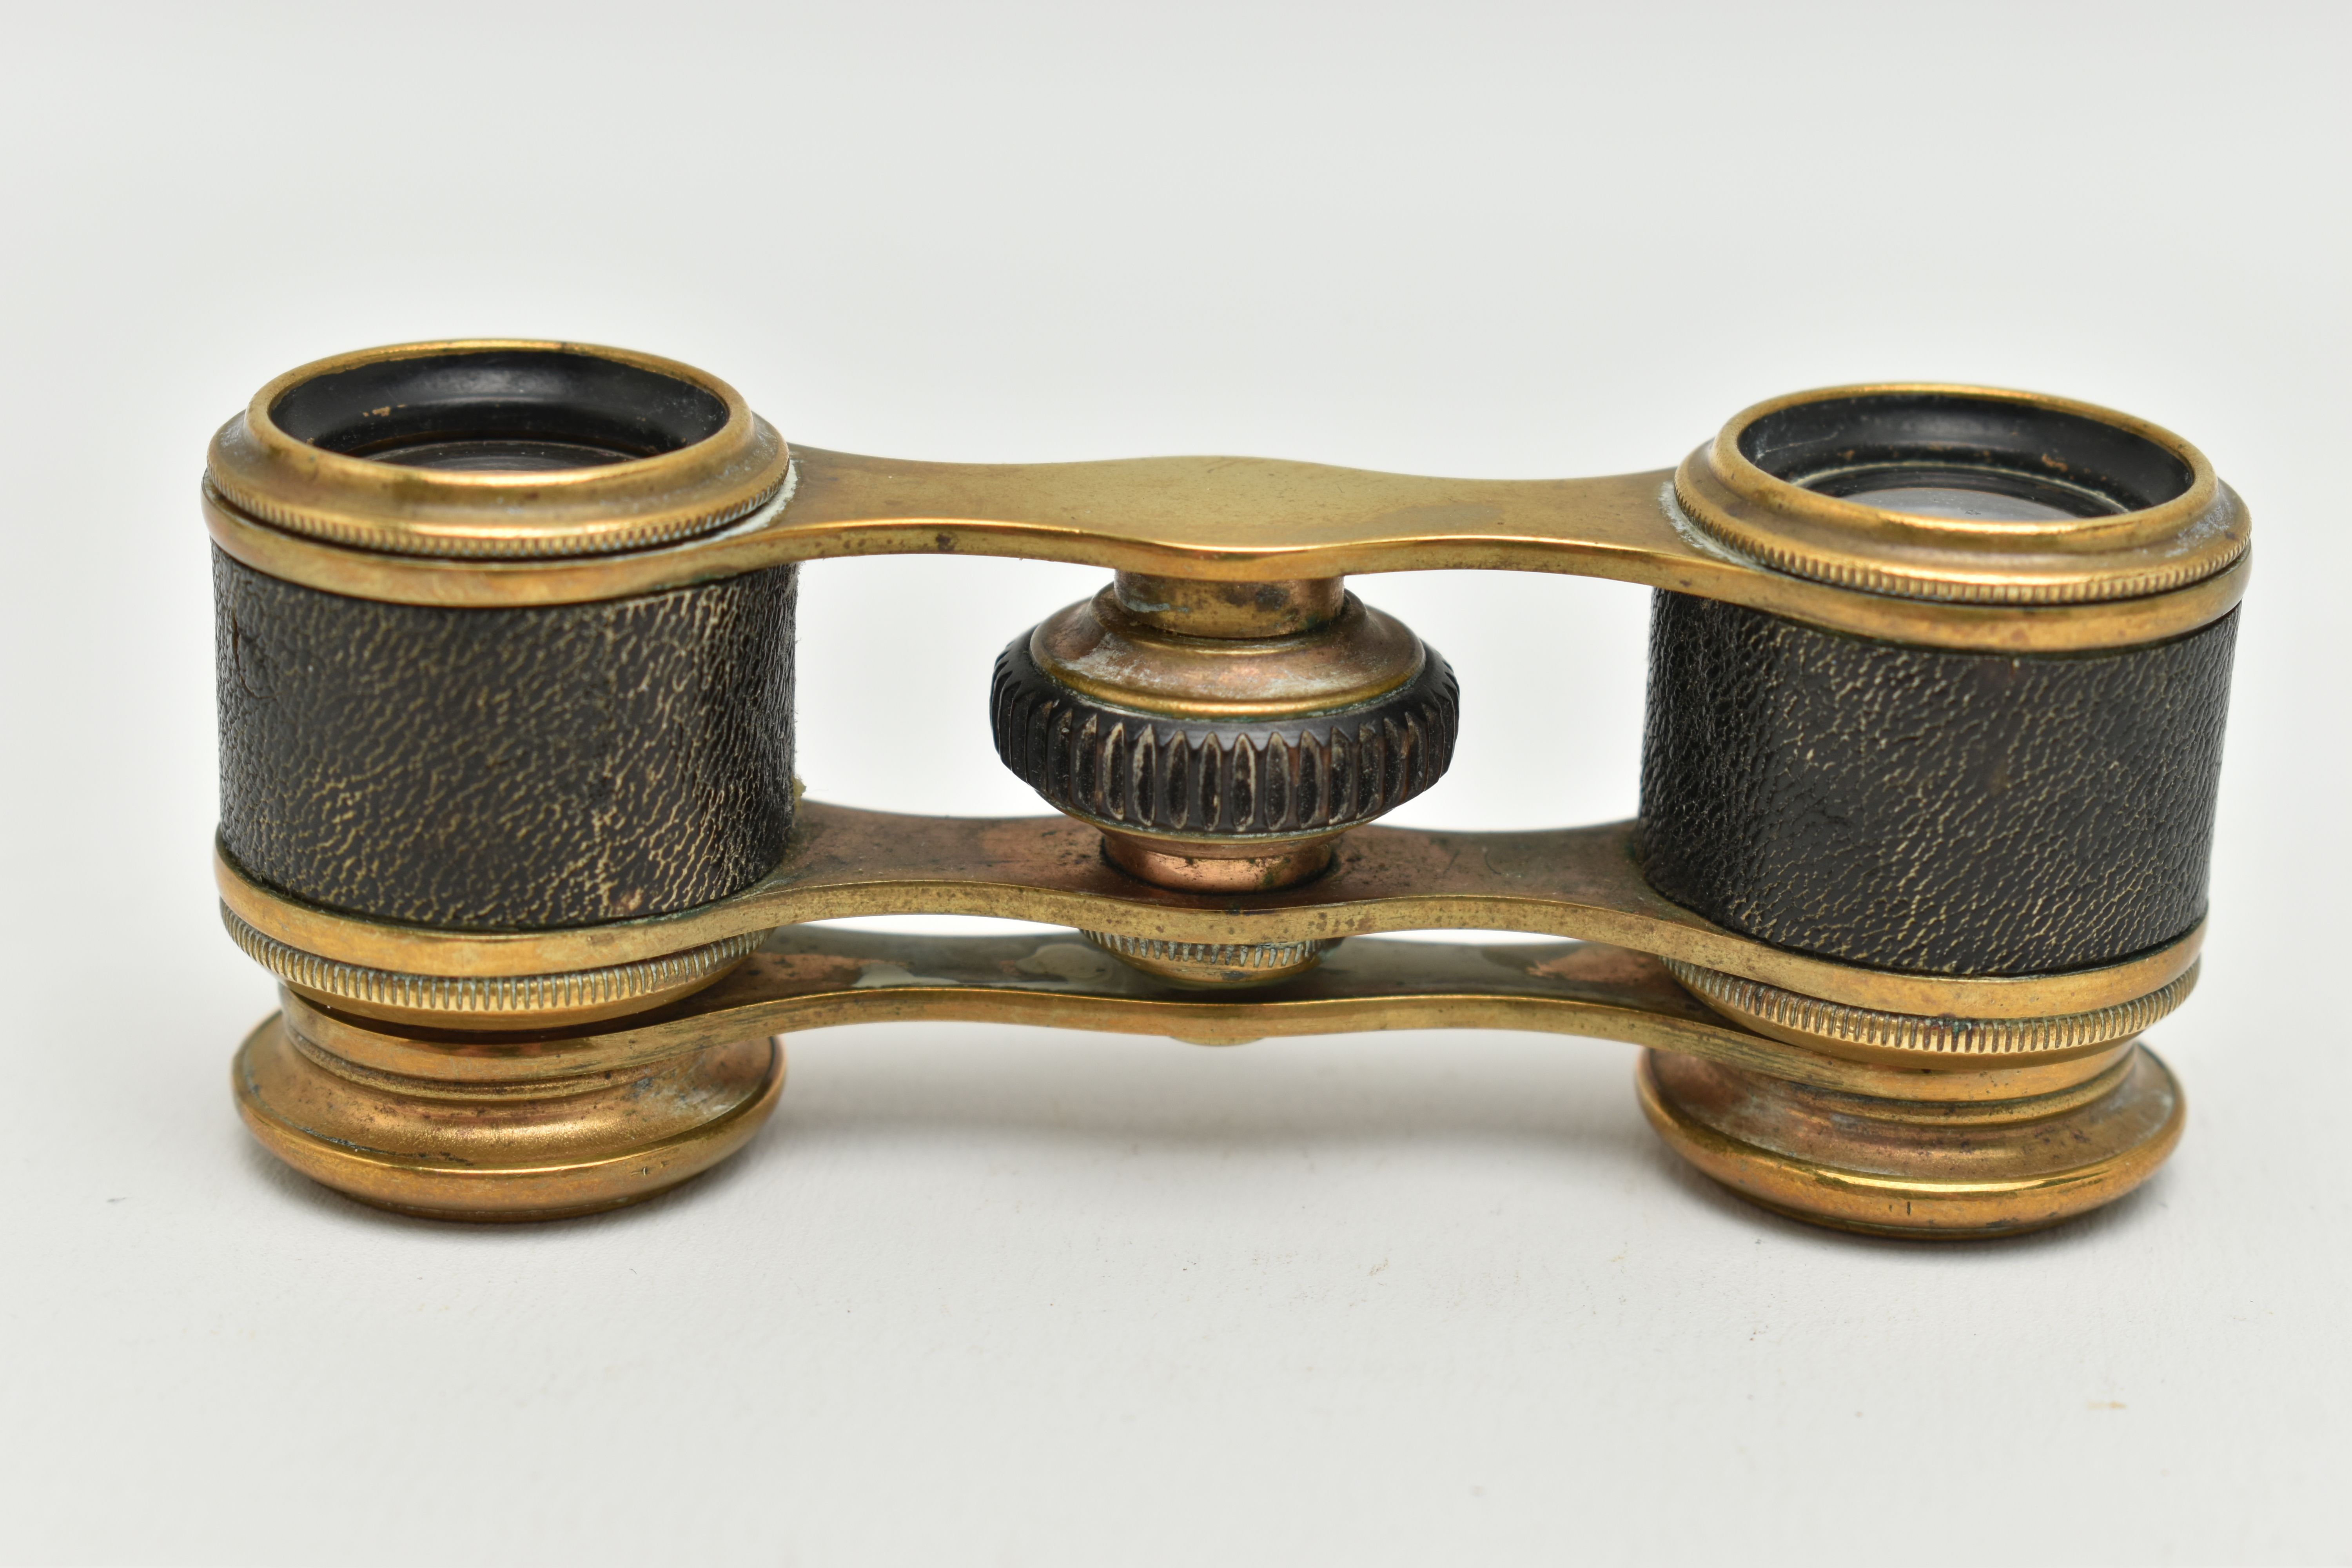 A SMALL PAIR OF EARLY 20TH CENTURY BRASS OPERA GLASSES, with black lacquered eyepieces and brown - Image 3 of 4